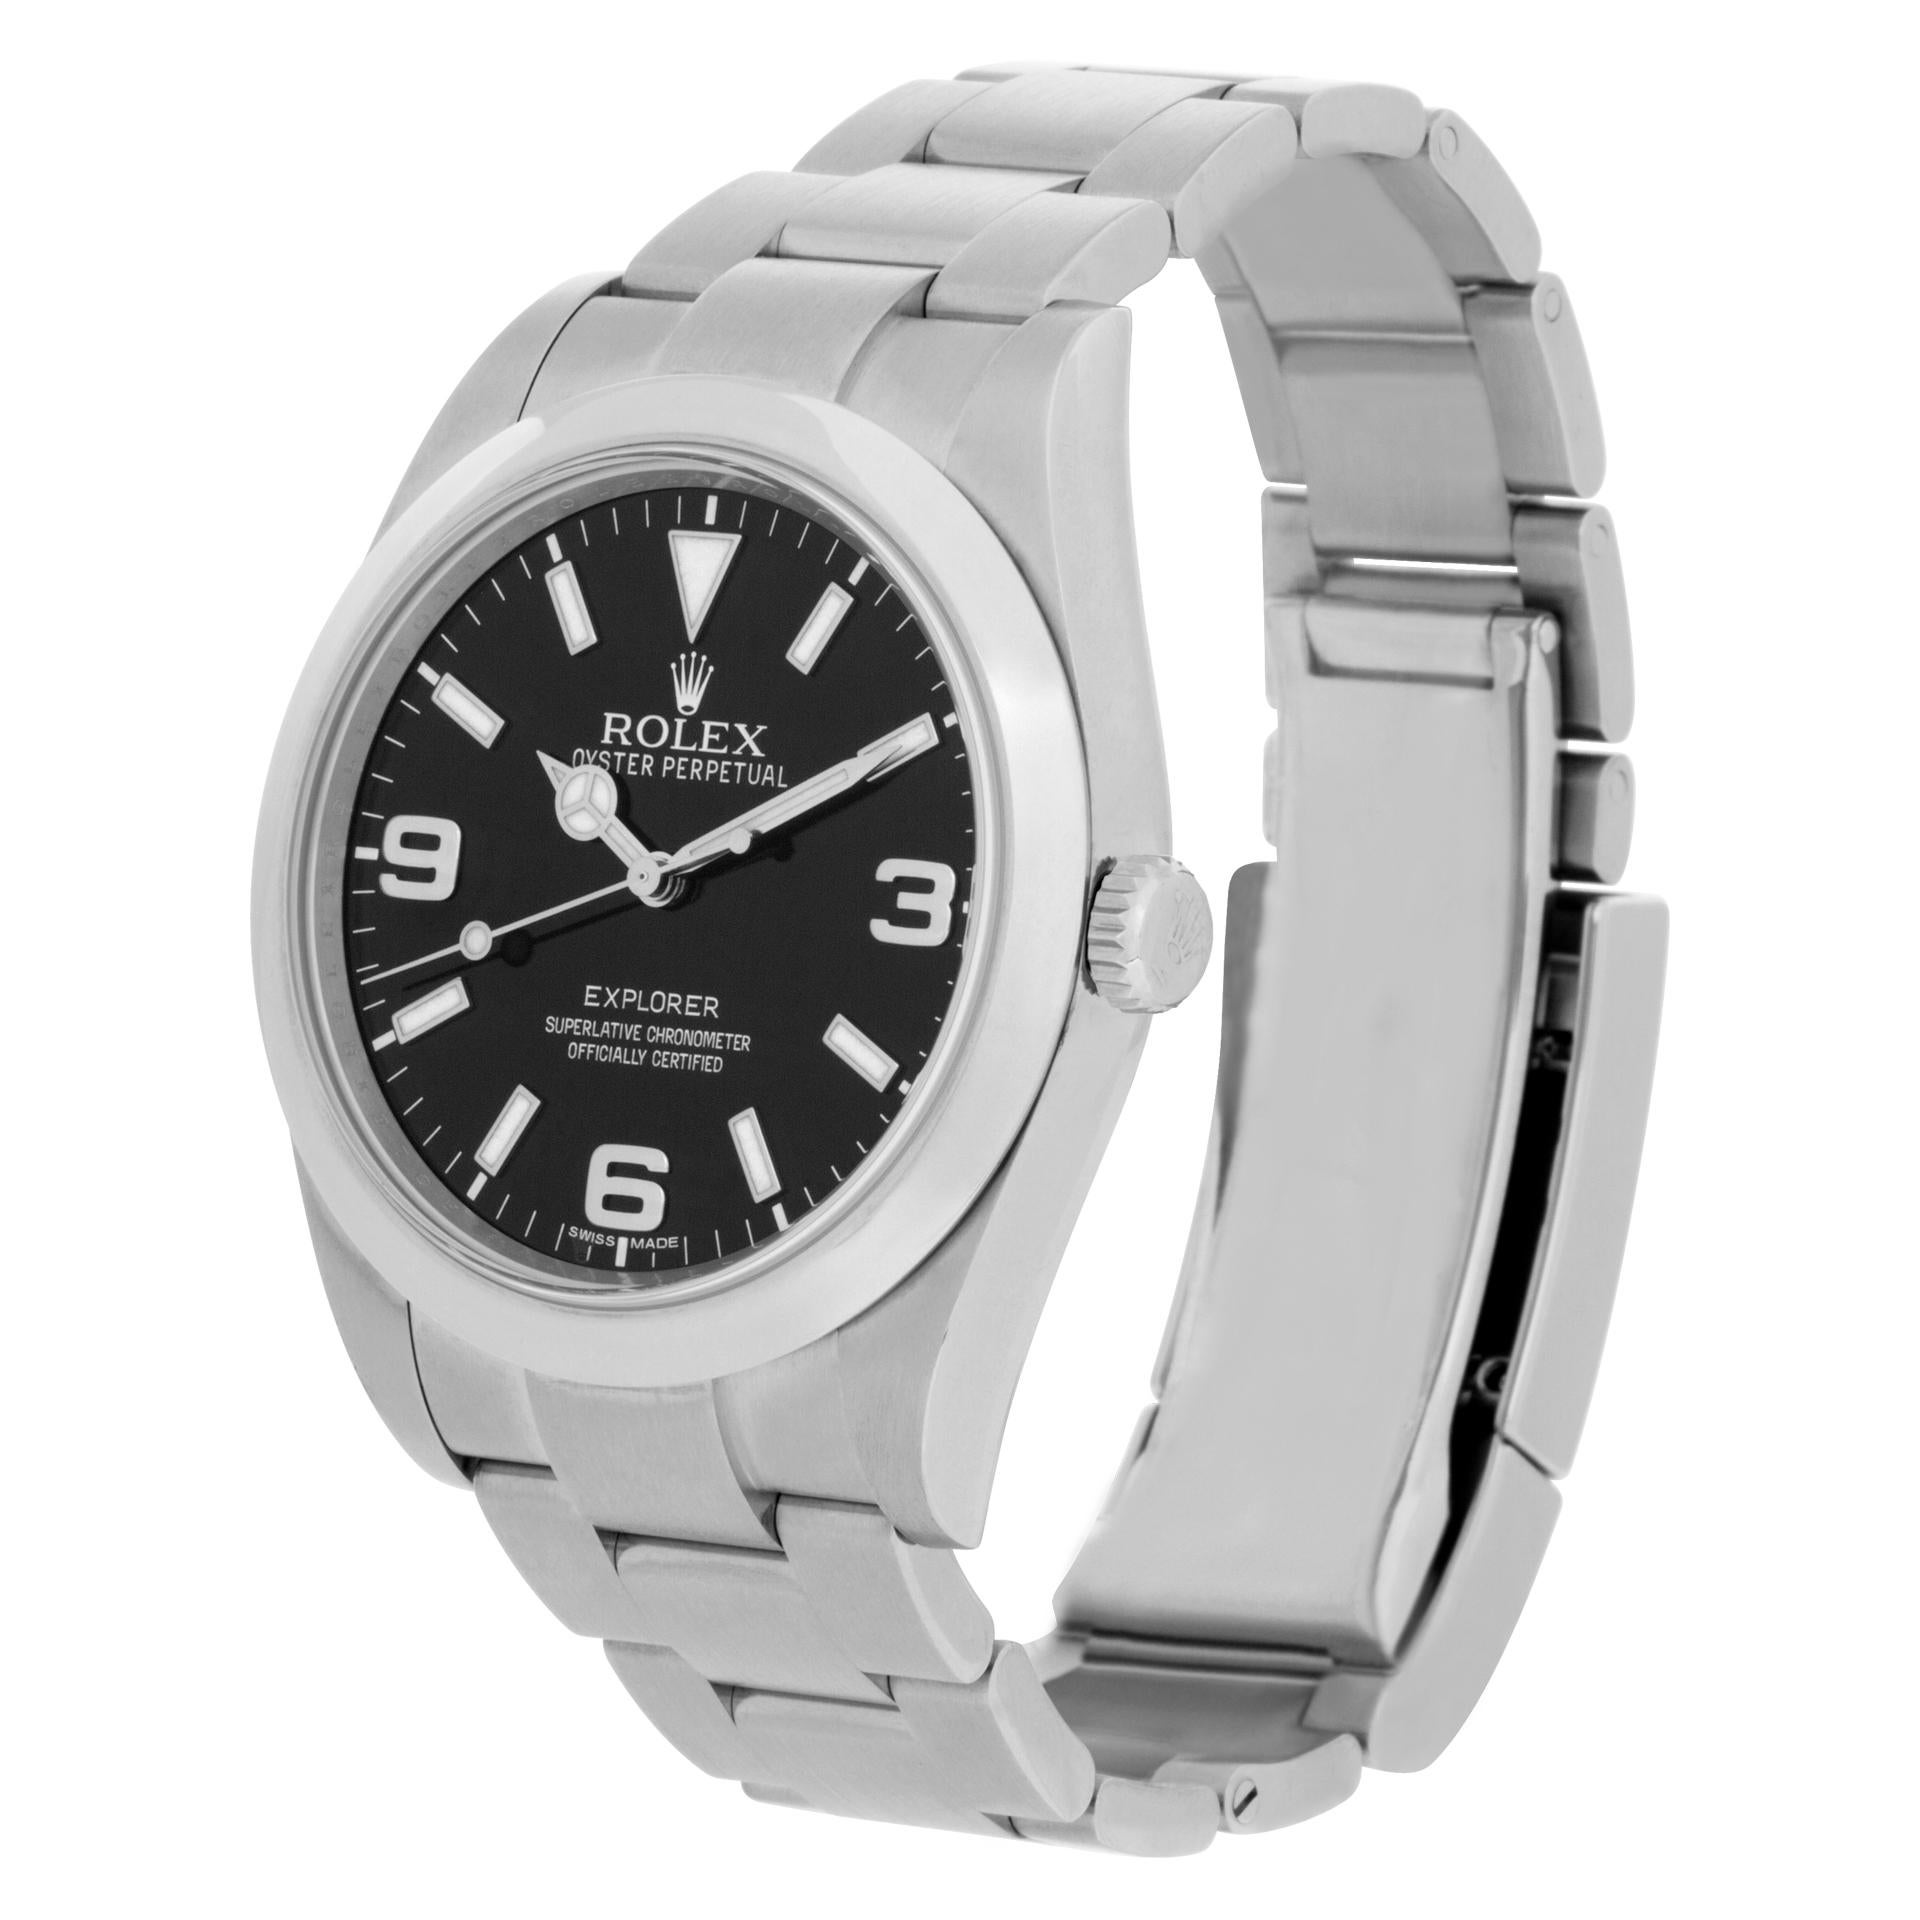 Rolex Explorer in stainless steel. Auto w/ sweep seconds. 39 mm case size. Ref 214270. **Bank Wire Only at this price** Fine Pre-owned Rolex Watch.

Certified preowned Sport Rolex Explorer 214270 watch is made out of Stainless steel on a Stainless